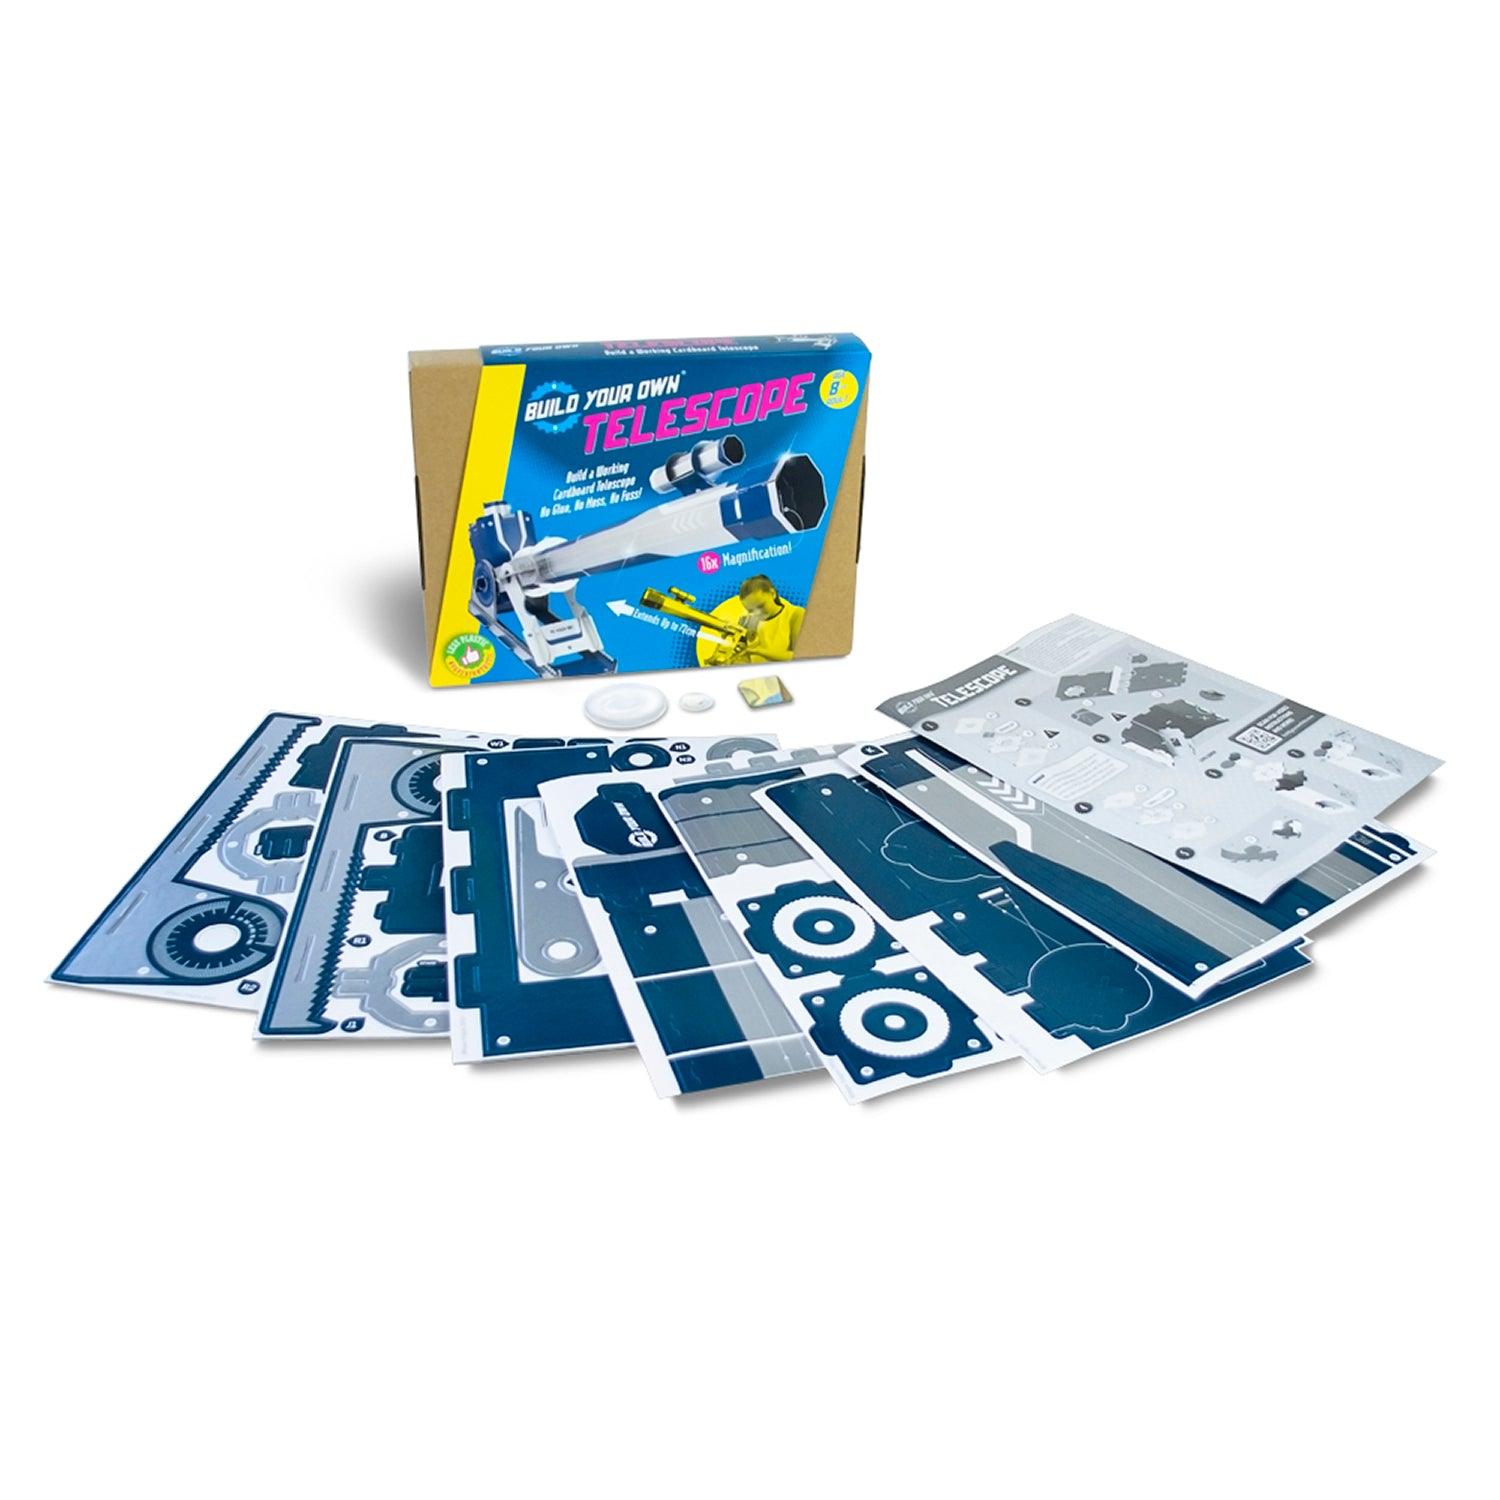 Build Your Own Telescope Kit - Kits - Science Museum Shop